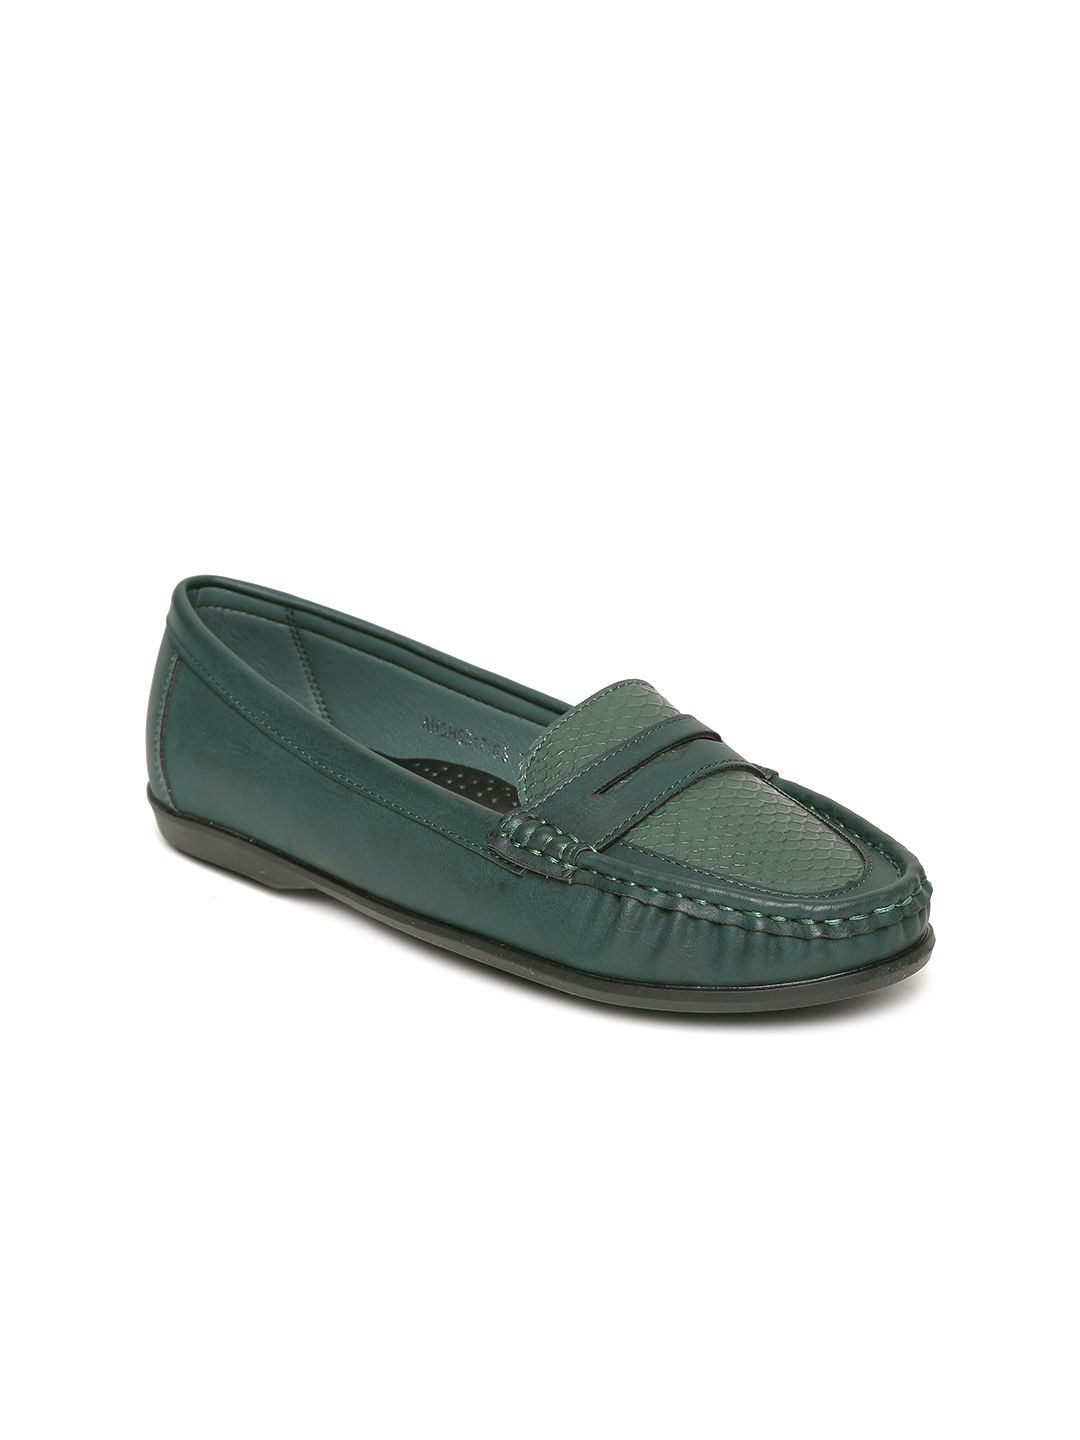 Allen Solly Women Green Snakeskin-Textured Loafers Price in India